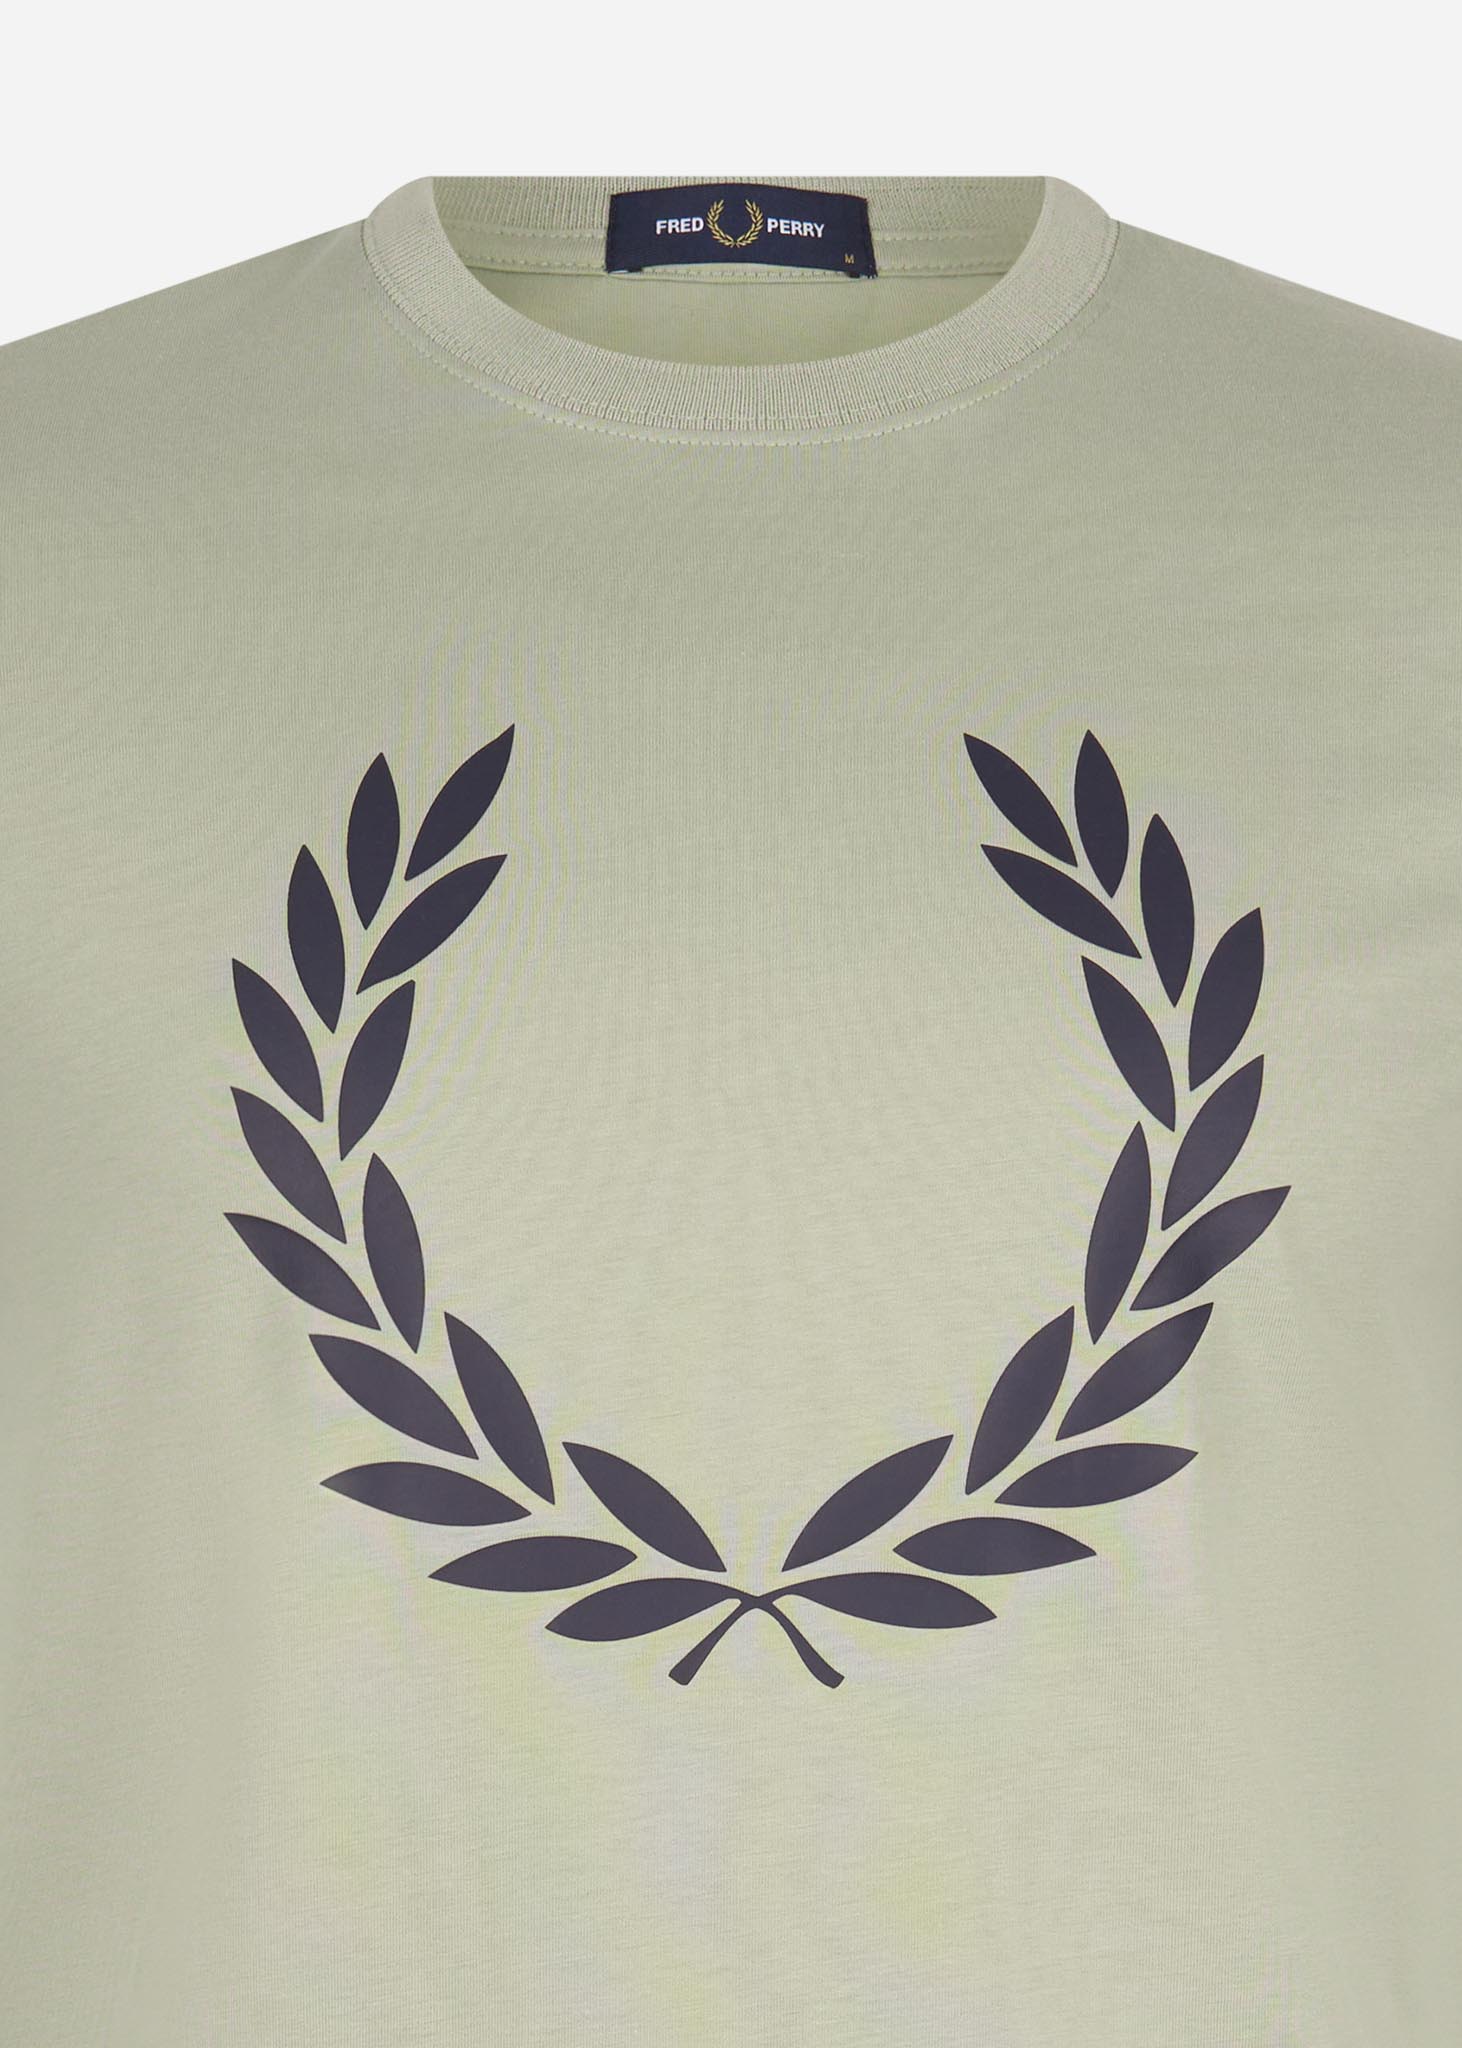 Fred Perry T-shirts  Printed Laurel wreath t-shirt - seagrass 